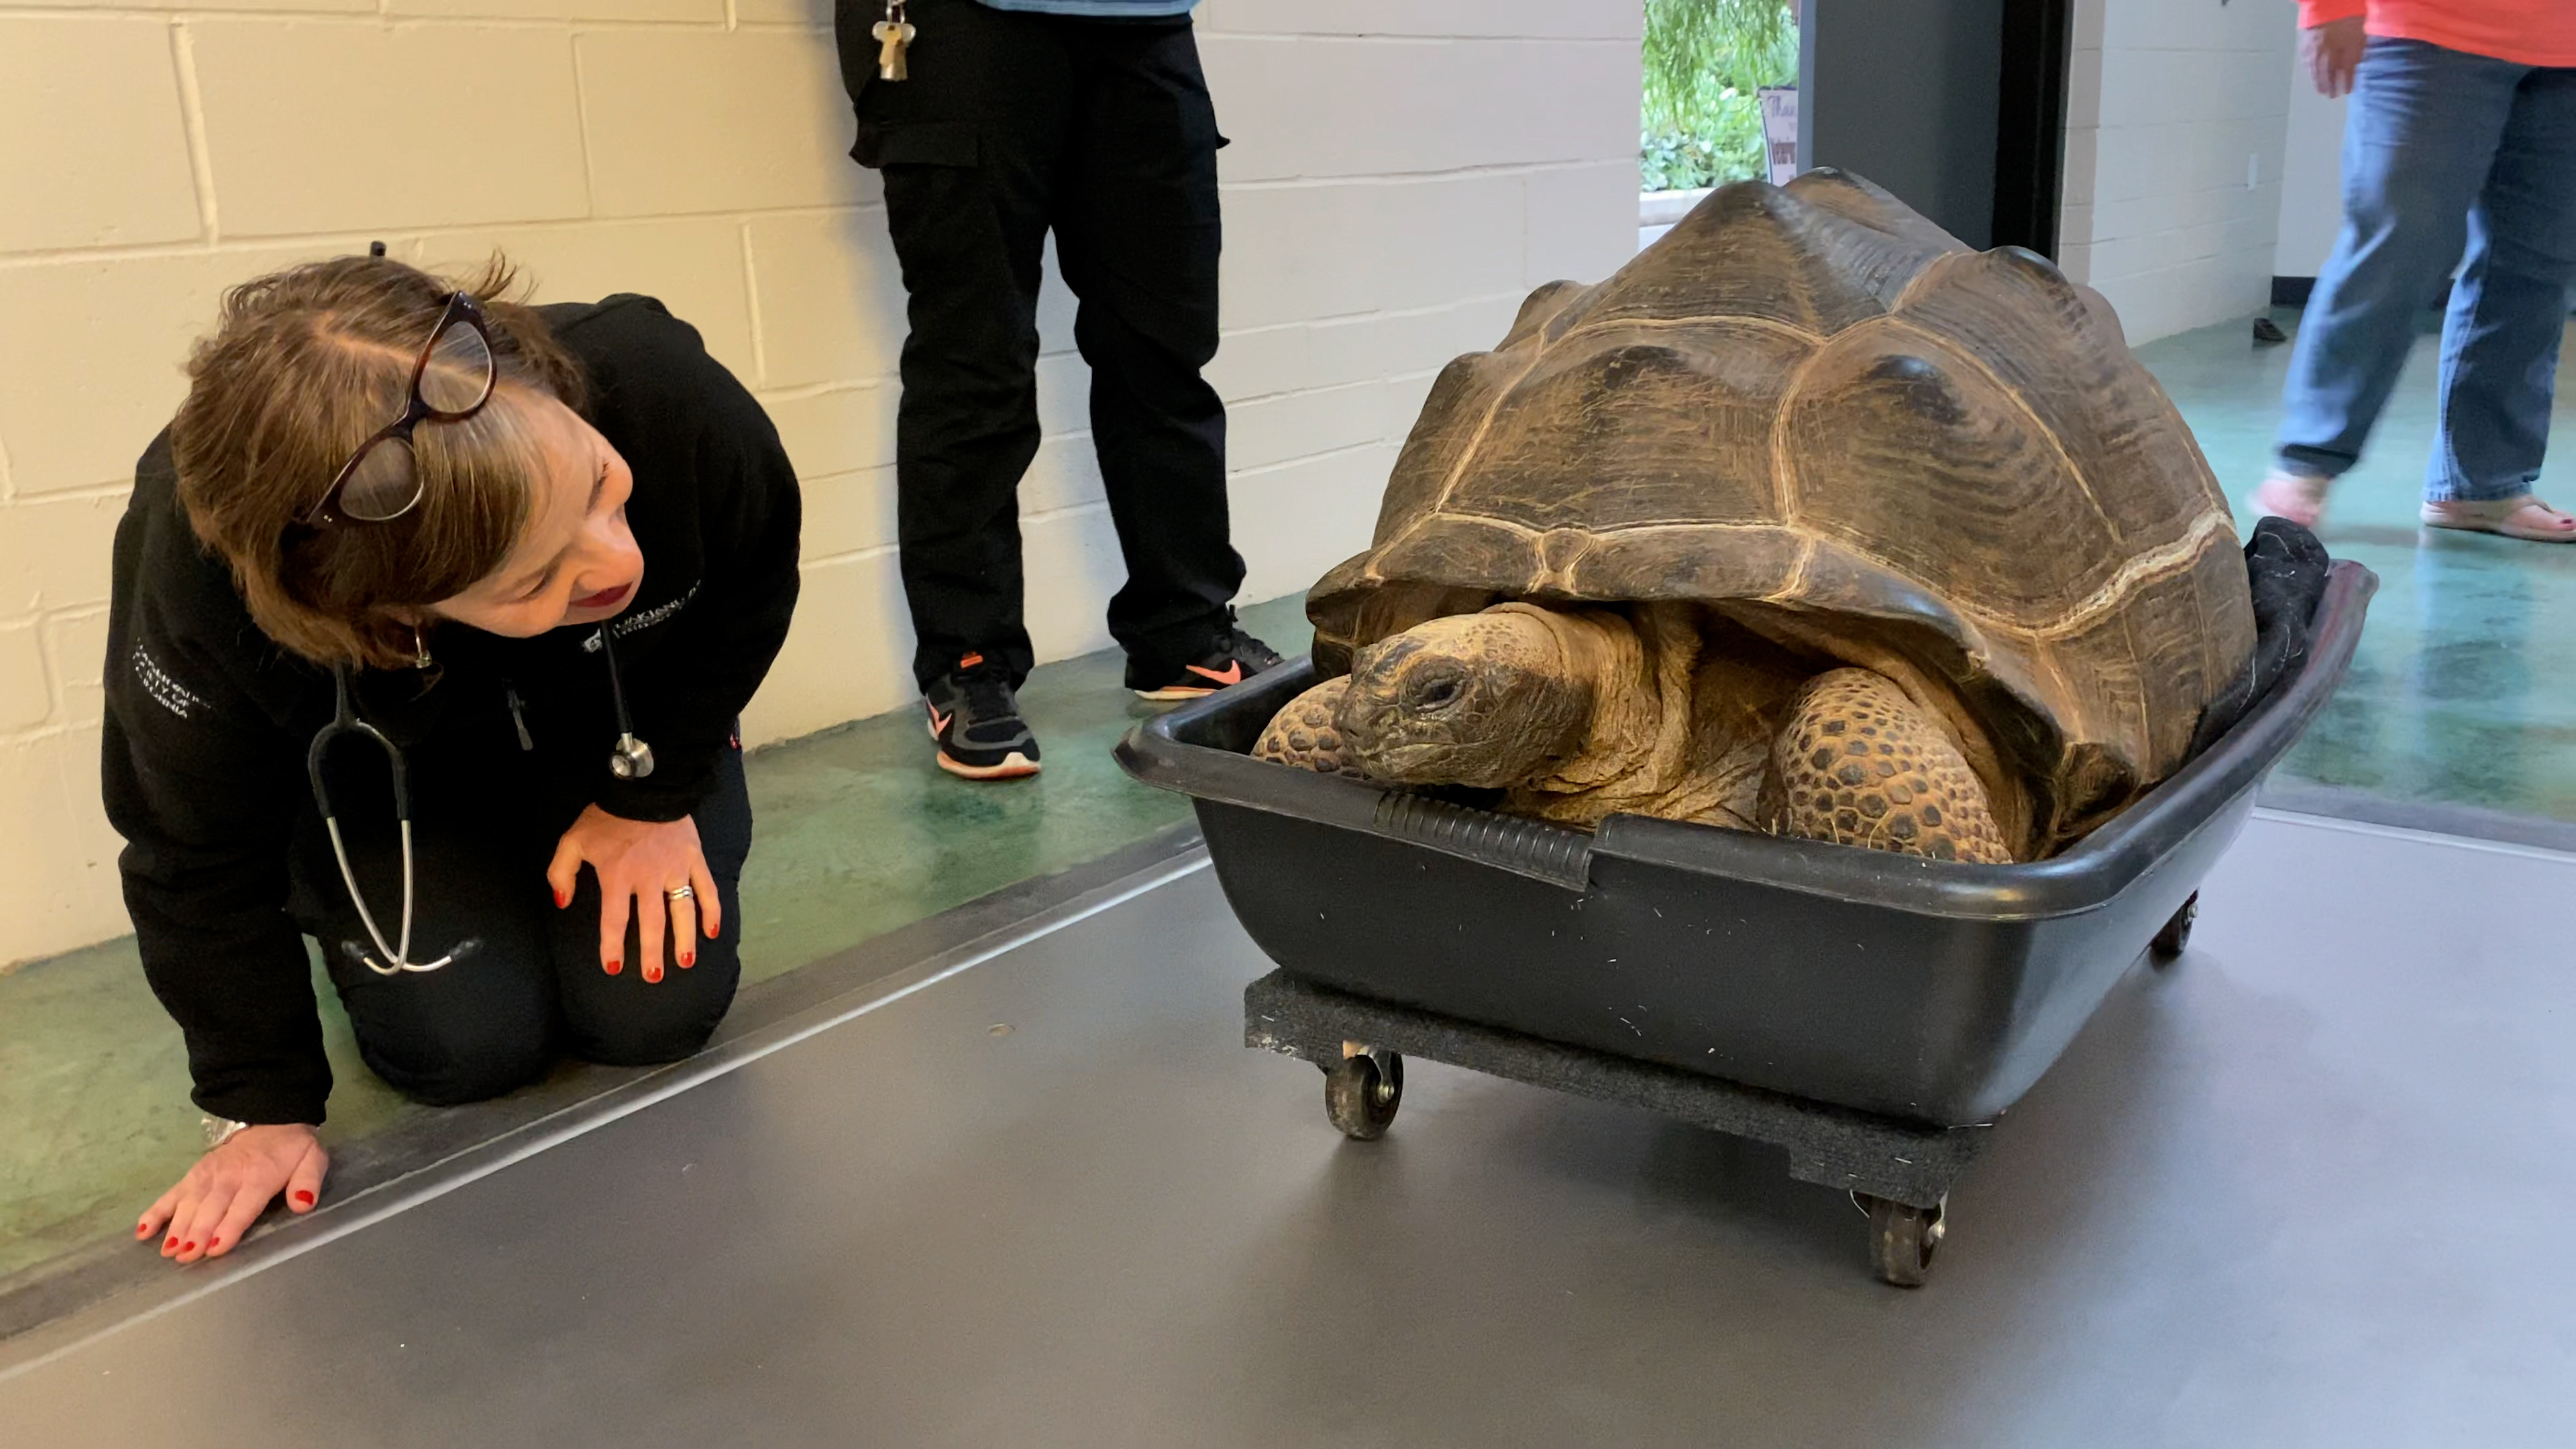 Dr. Alex Herman, VP of Veterinary Services at Oakland Zoo, welcoming Aldabra tortoise rescues